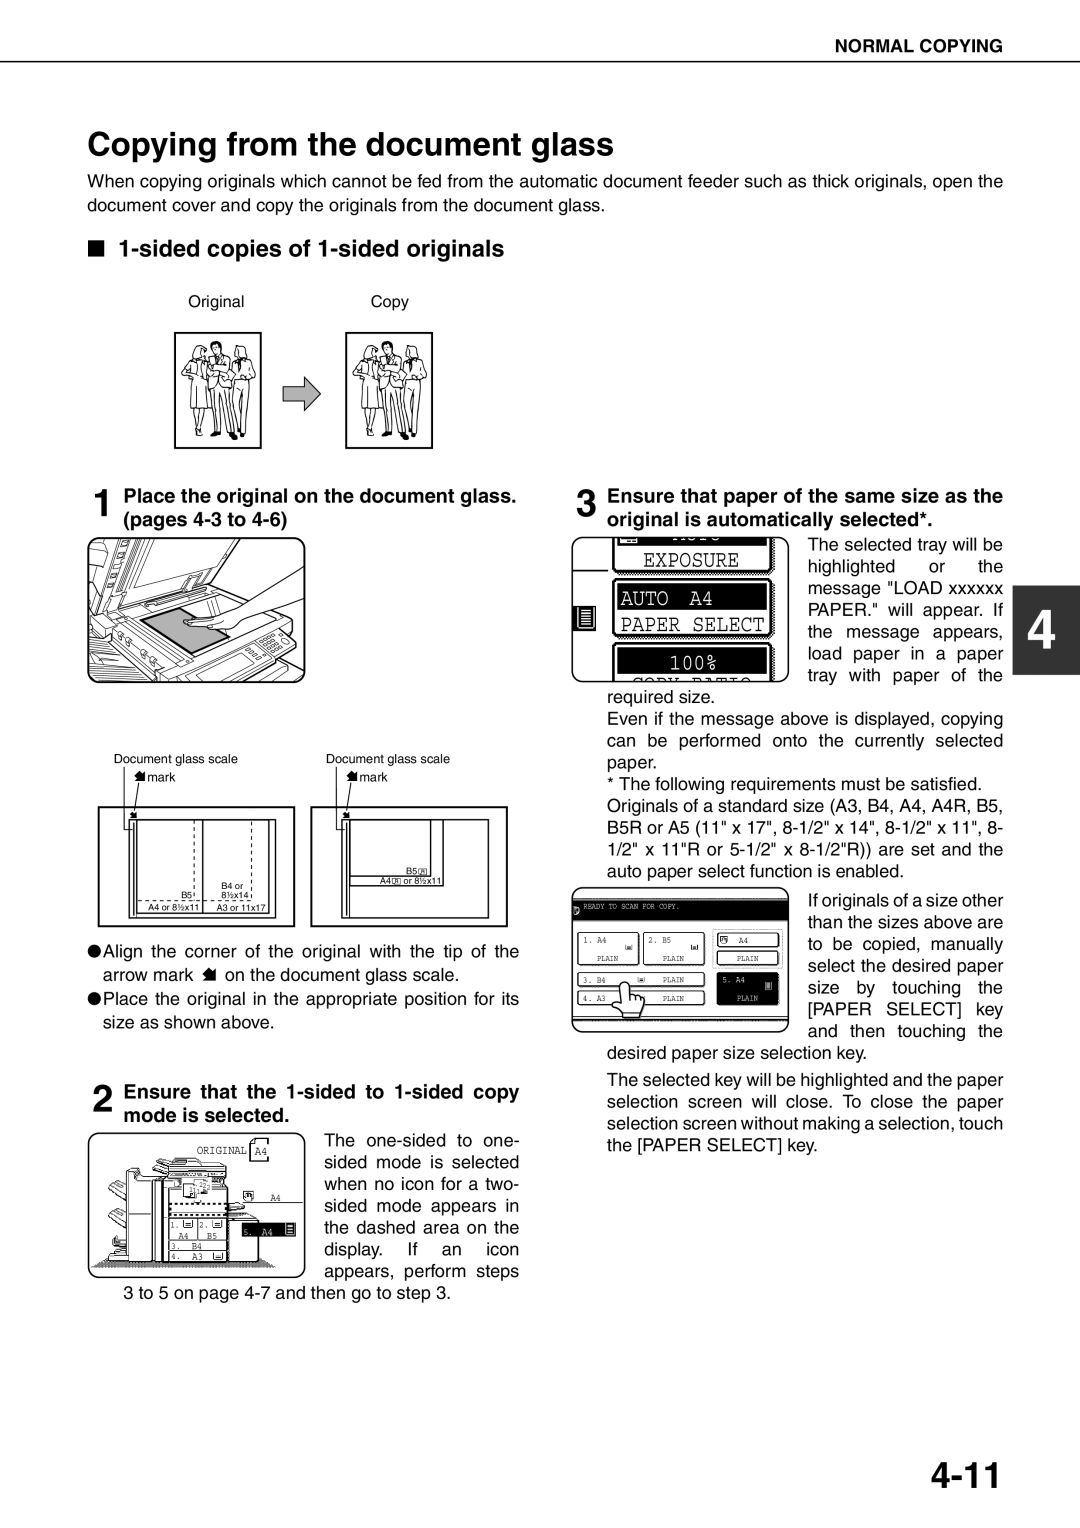 Sharp MX-M700U 4-11, Copying from the document glass, Place the original on the document glass. pages 4-3 to, Auto 